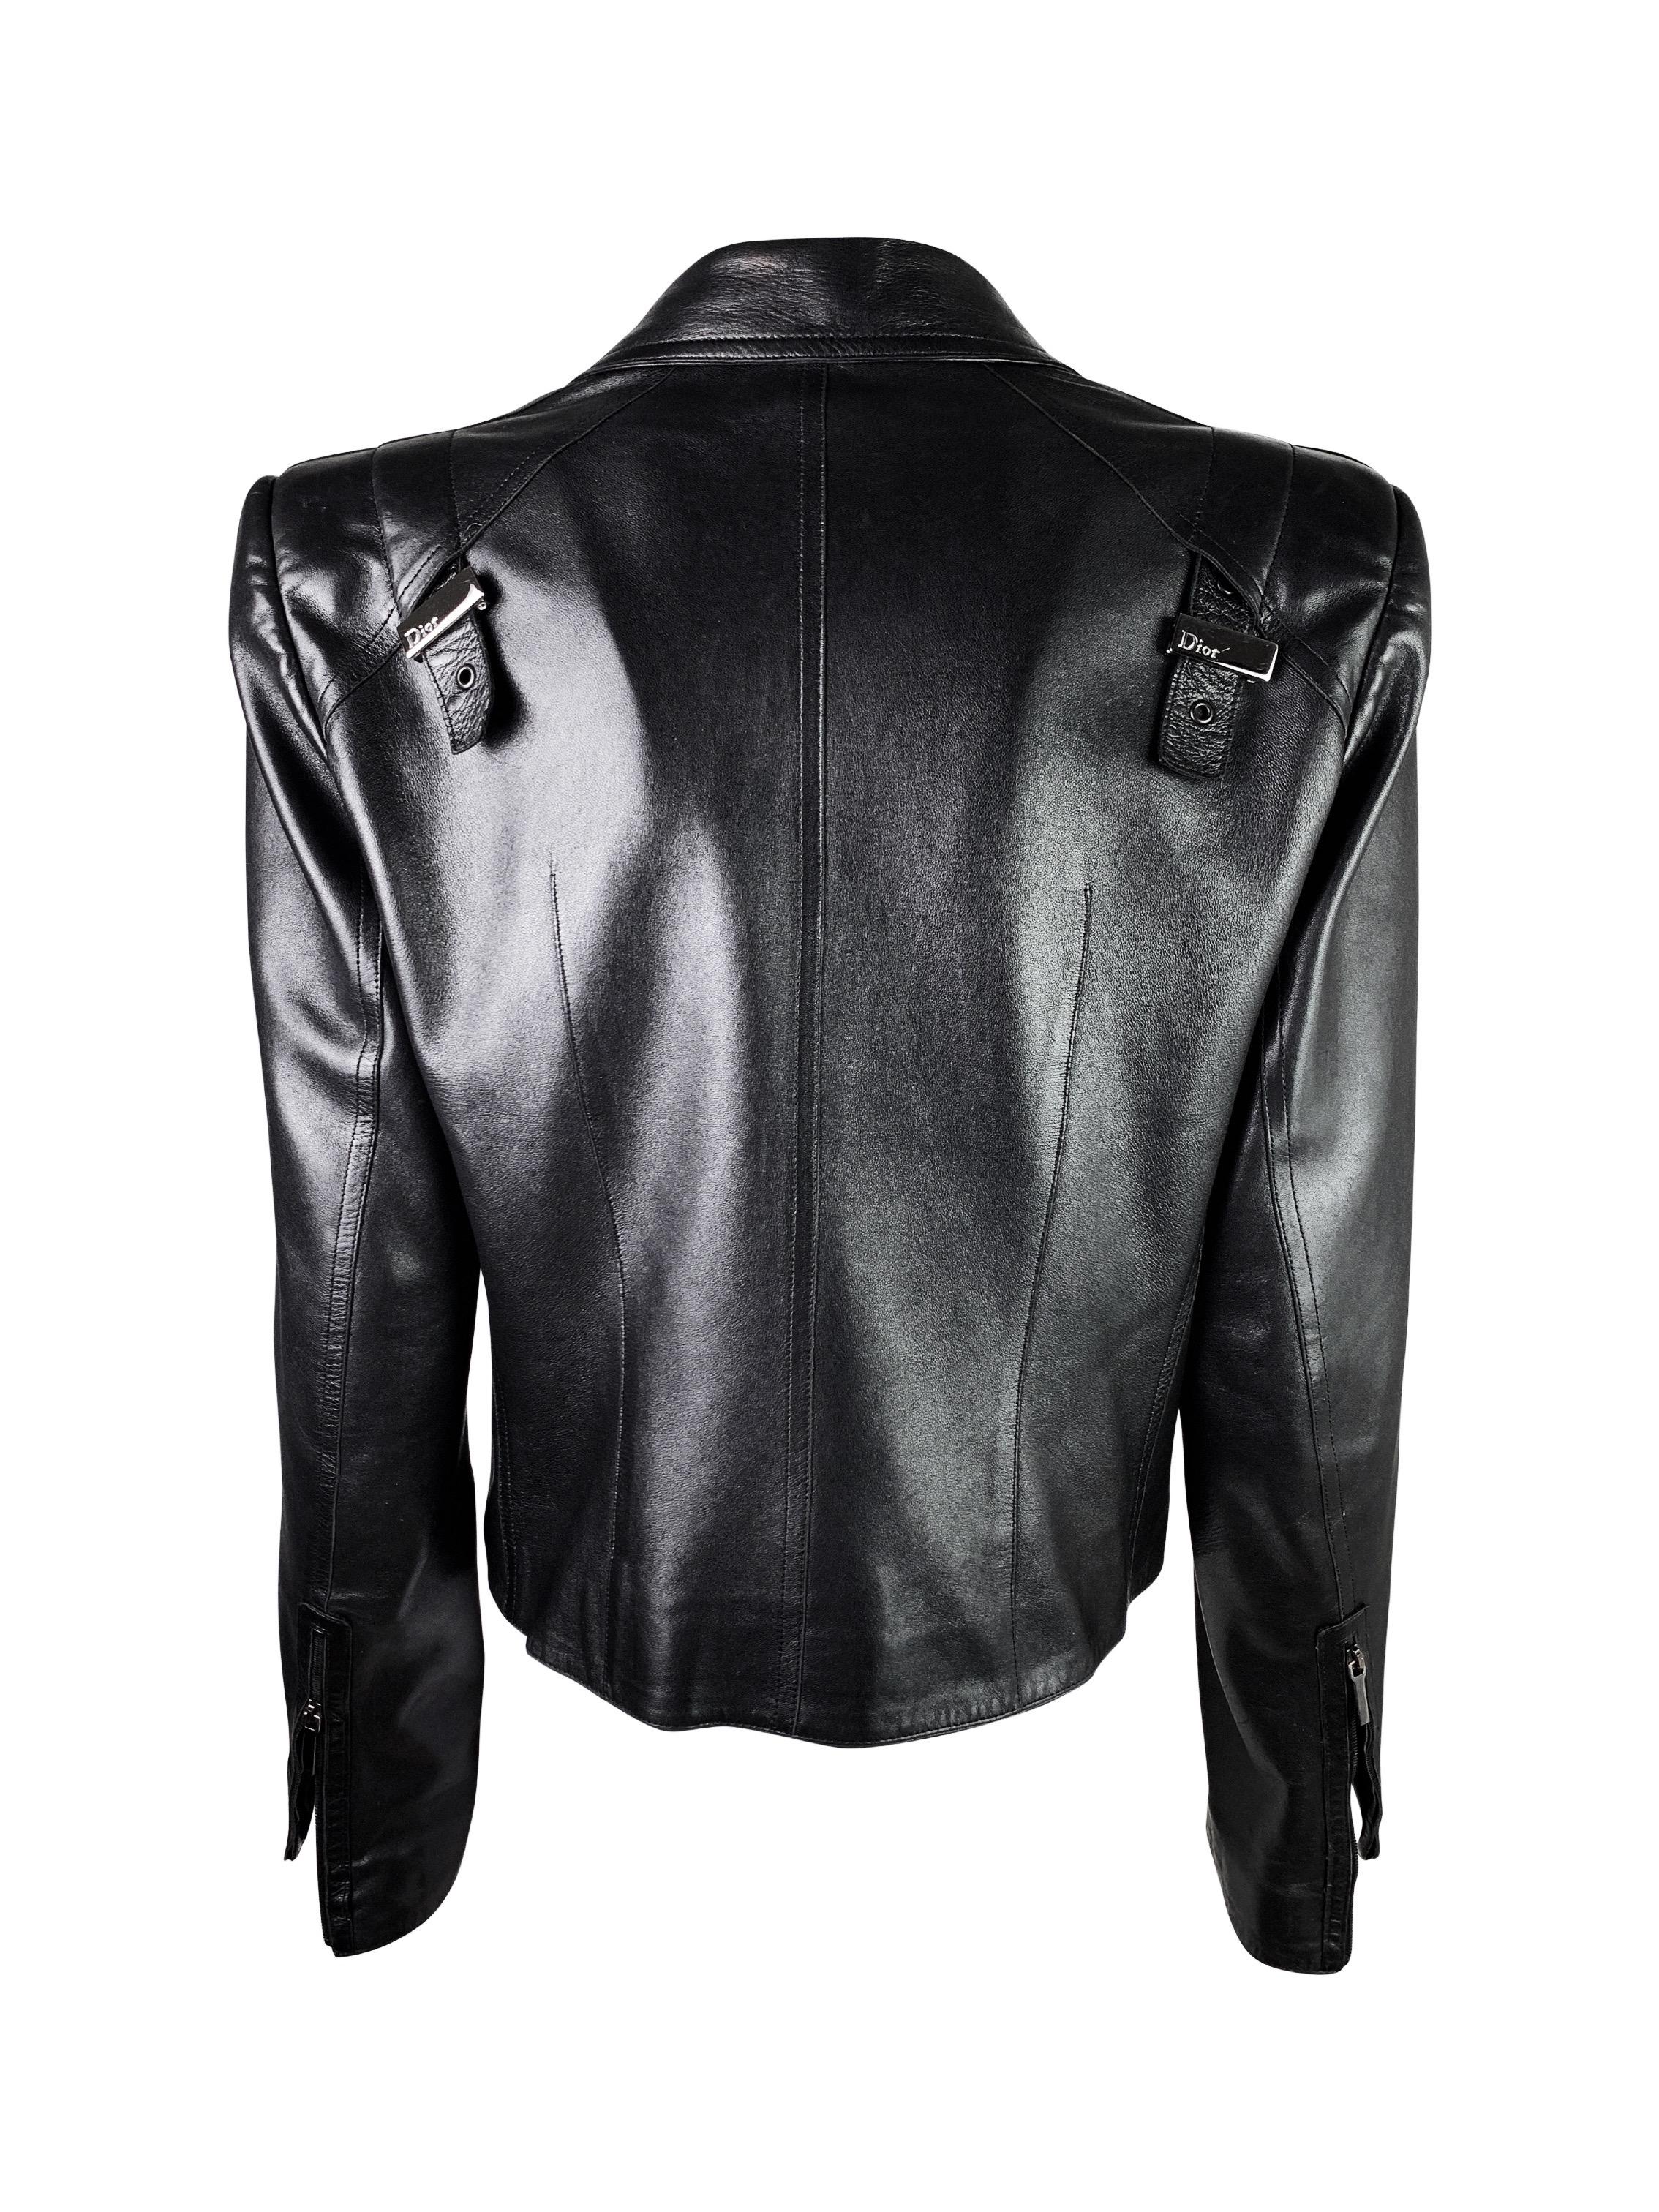 An incredible lambskin blazer with signature for the collection leather belts and small LOGO metal plates on the back.

Size FR 42, fits like M/L, please rely on the measurements (flat lay on one side):

Shoulder to shoulder - 43,5 cm (17 in)
Armpit